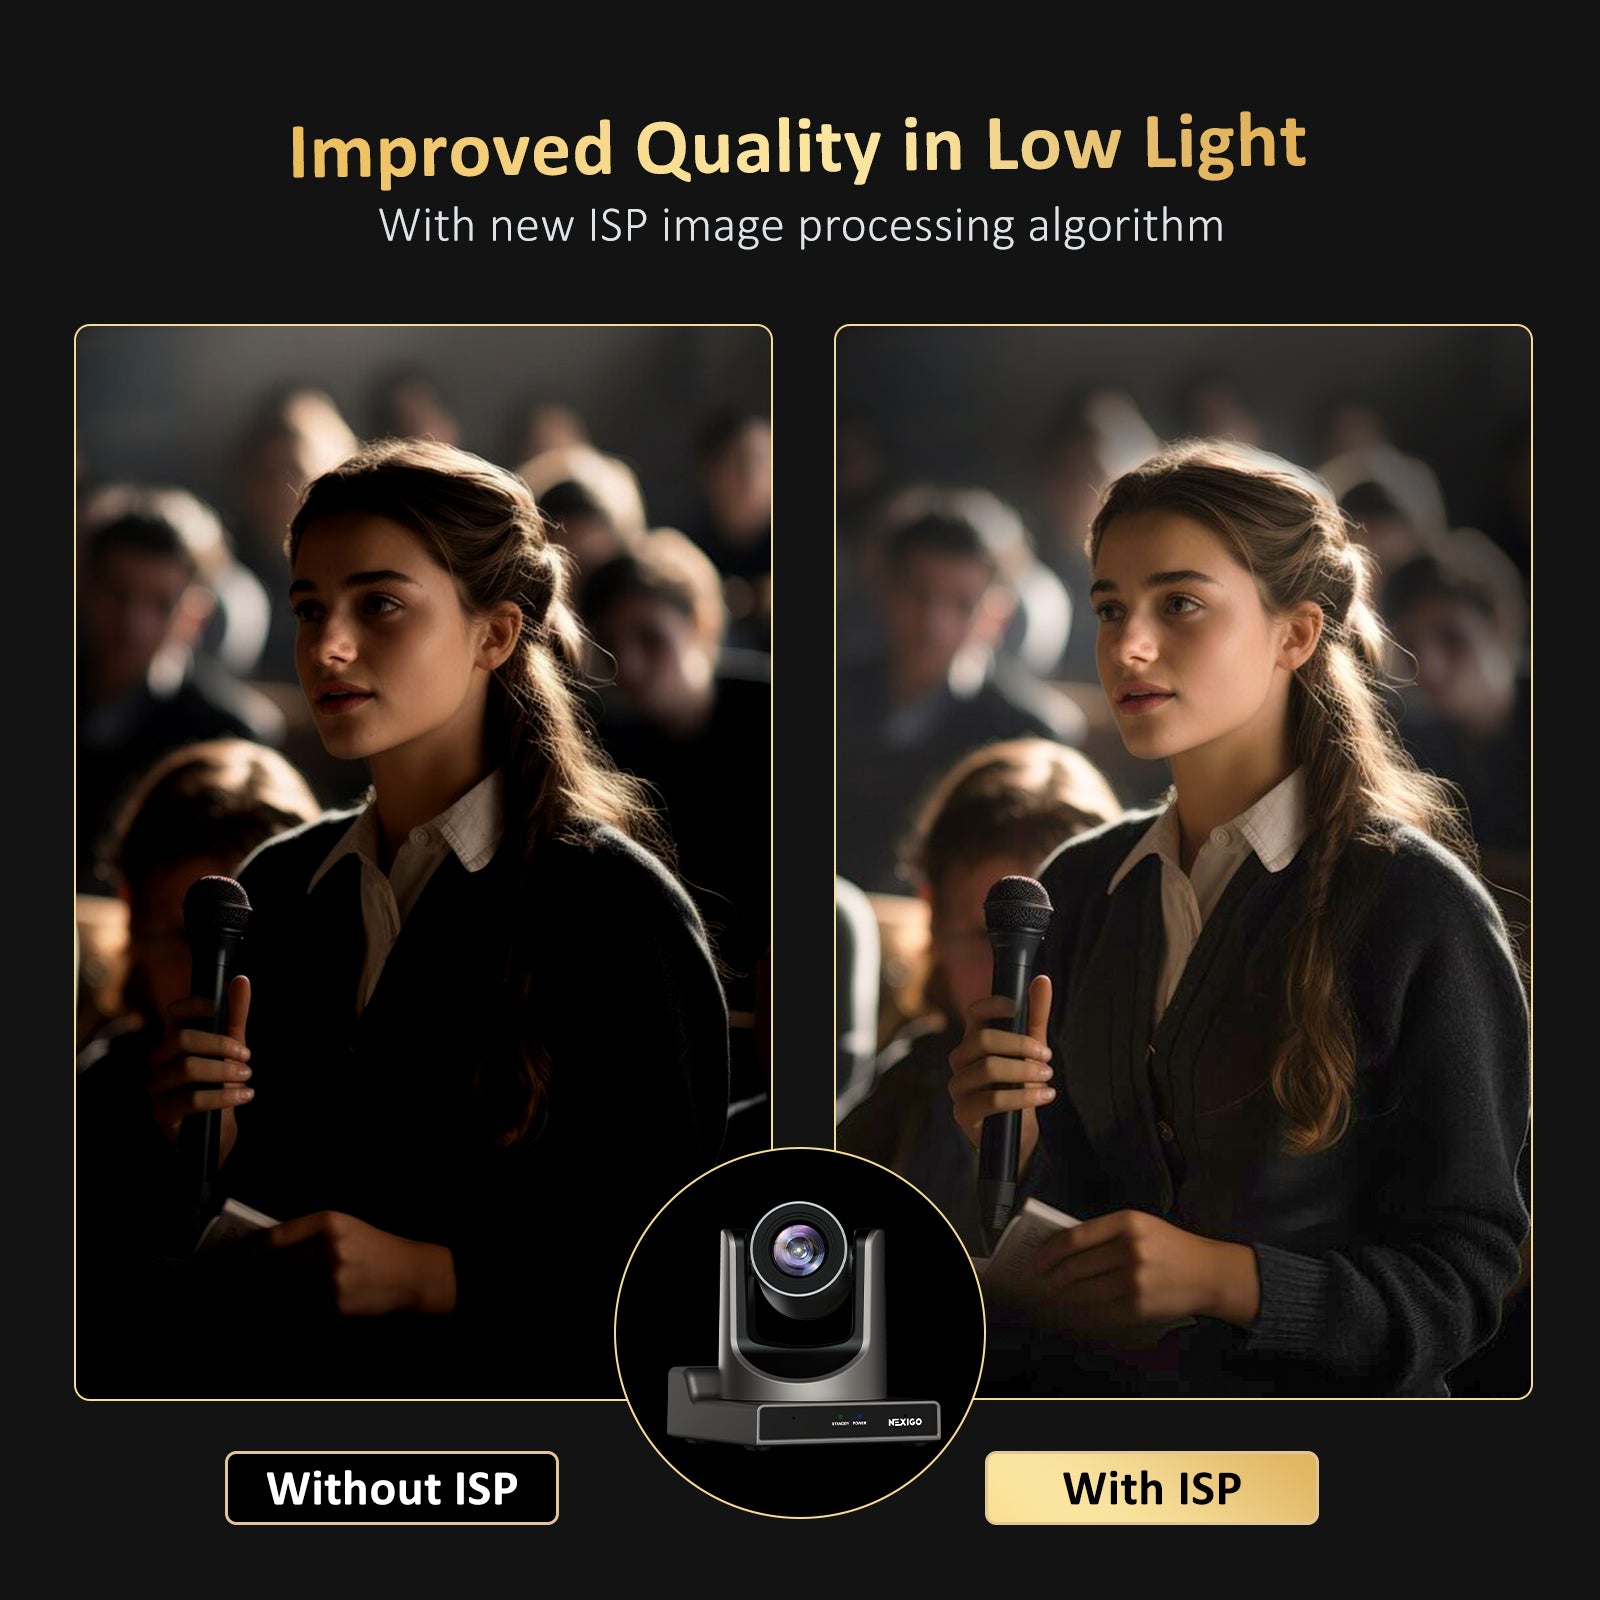 ISP technology enhances image clarity compared to images without ISP technology.